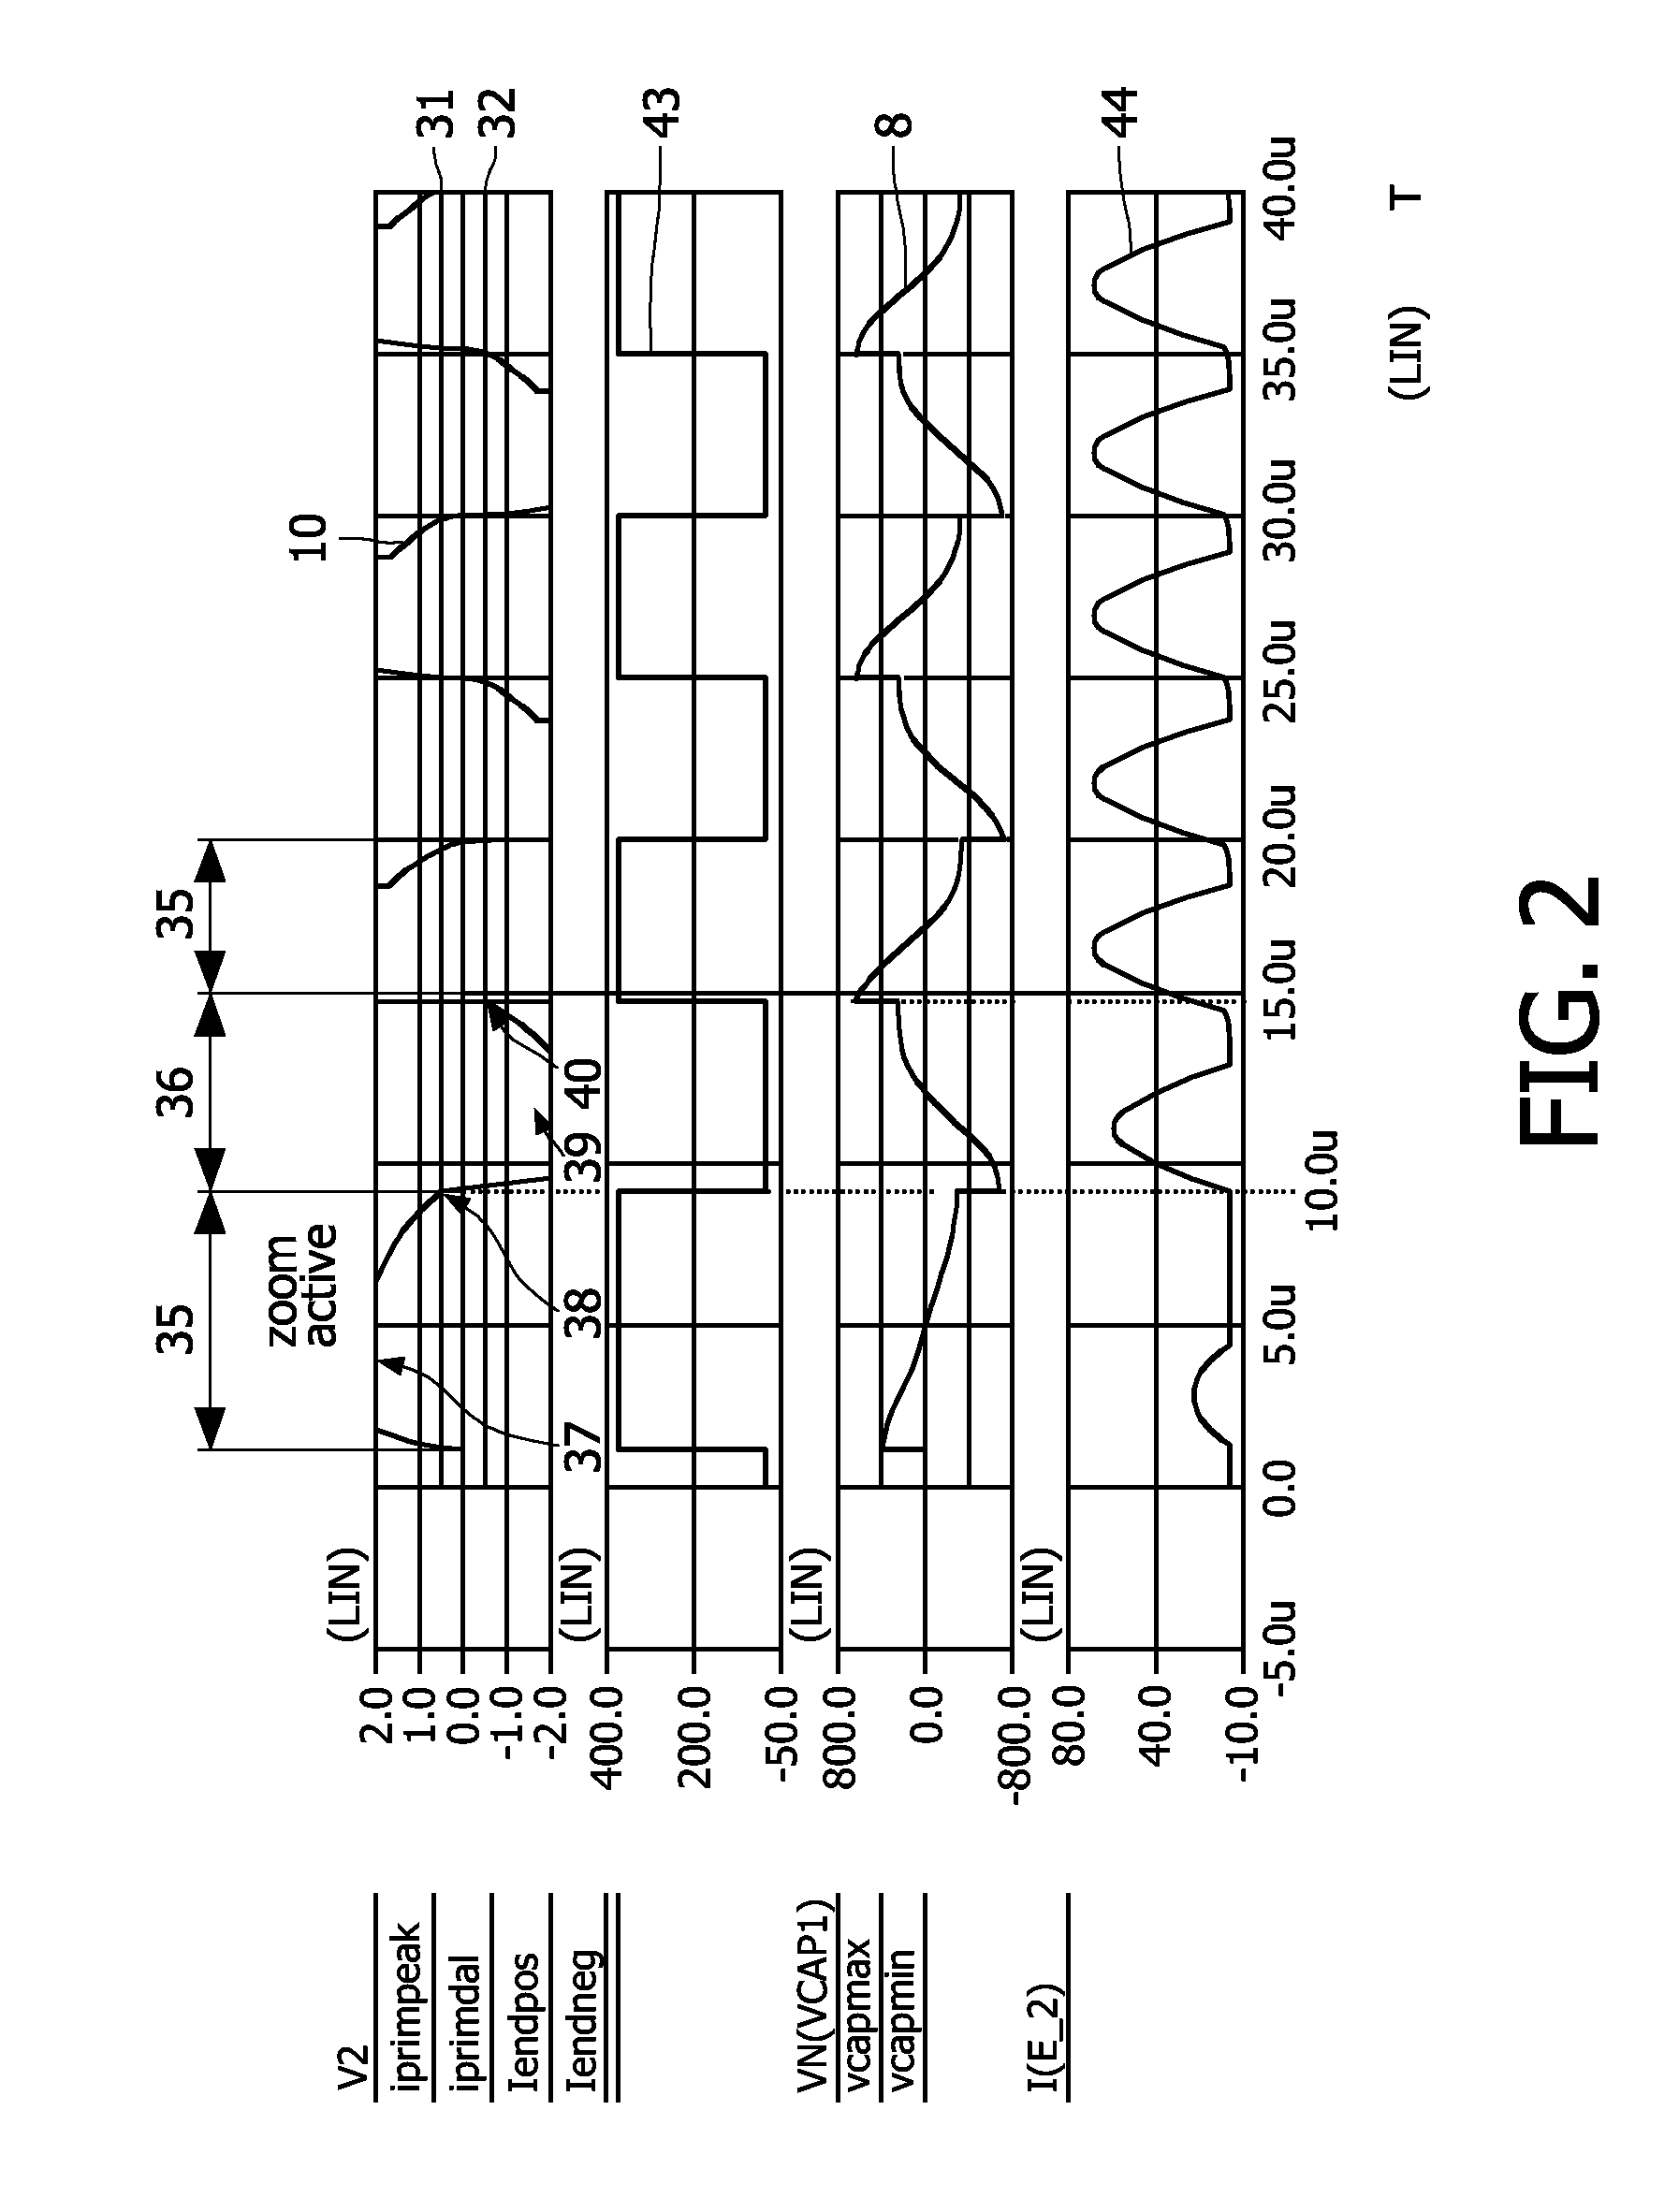 Control of a resonant converter by setting up criteria for state parameters of the resonant converter